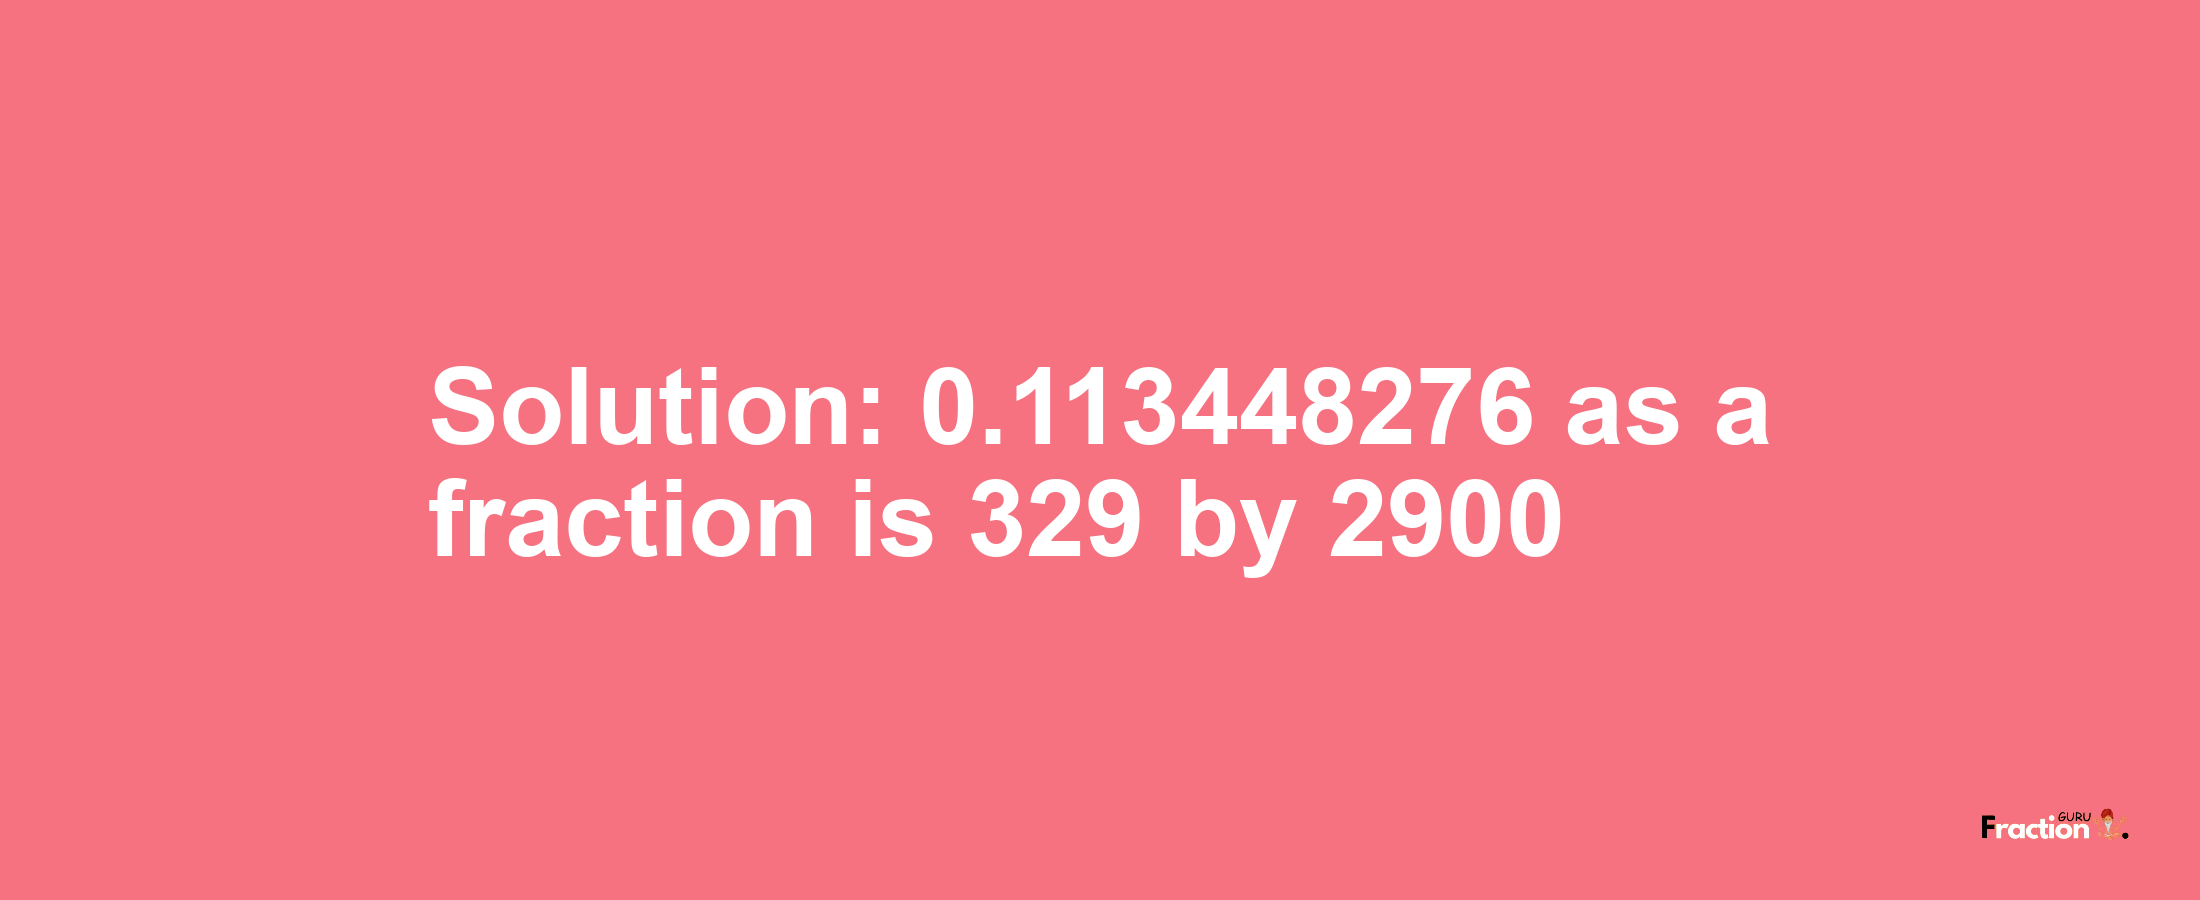 Solution:0.113448276 as a fraction is 329/2900